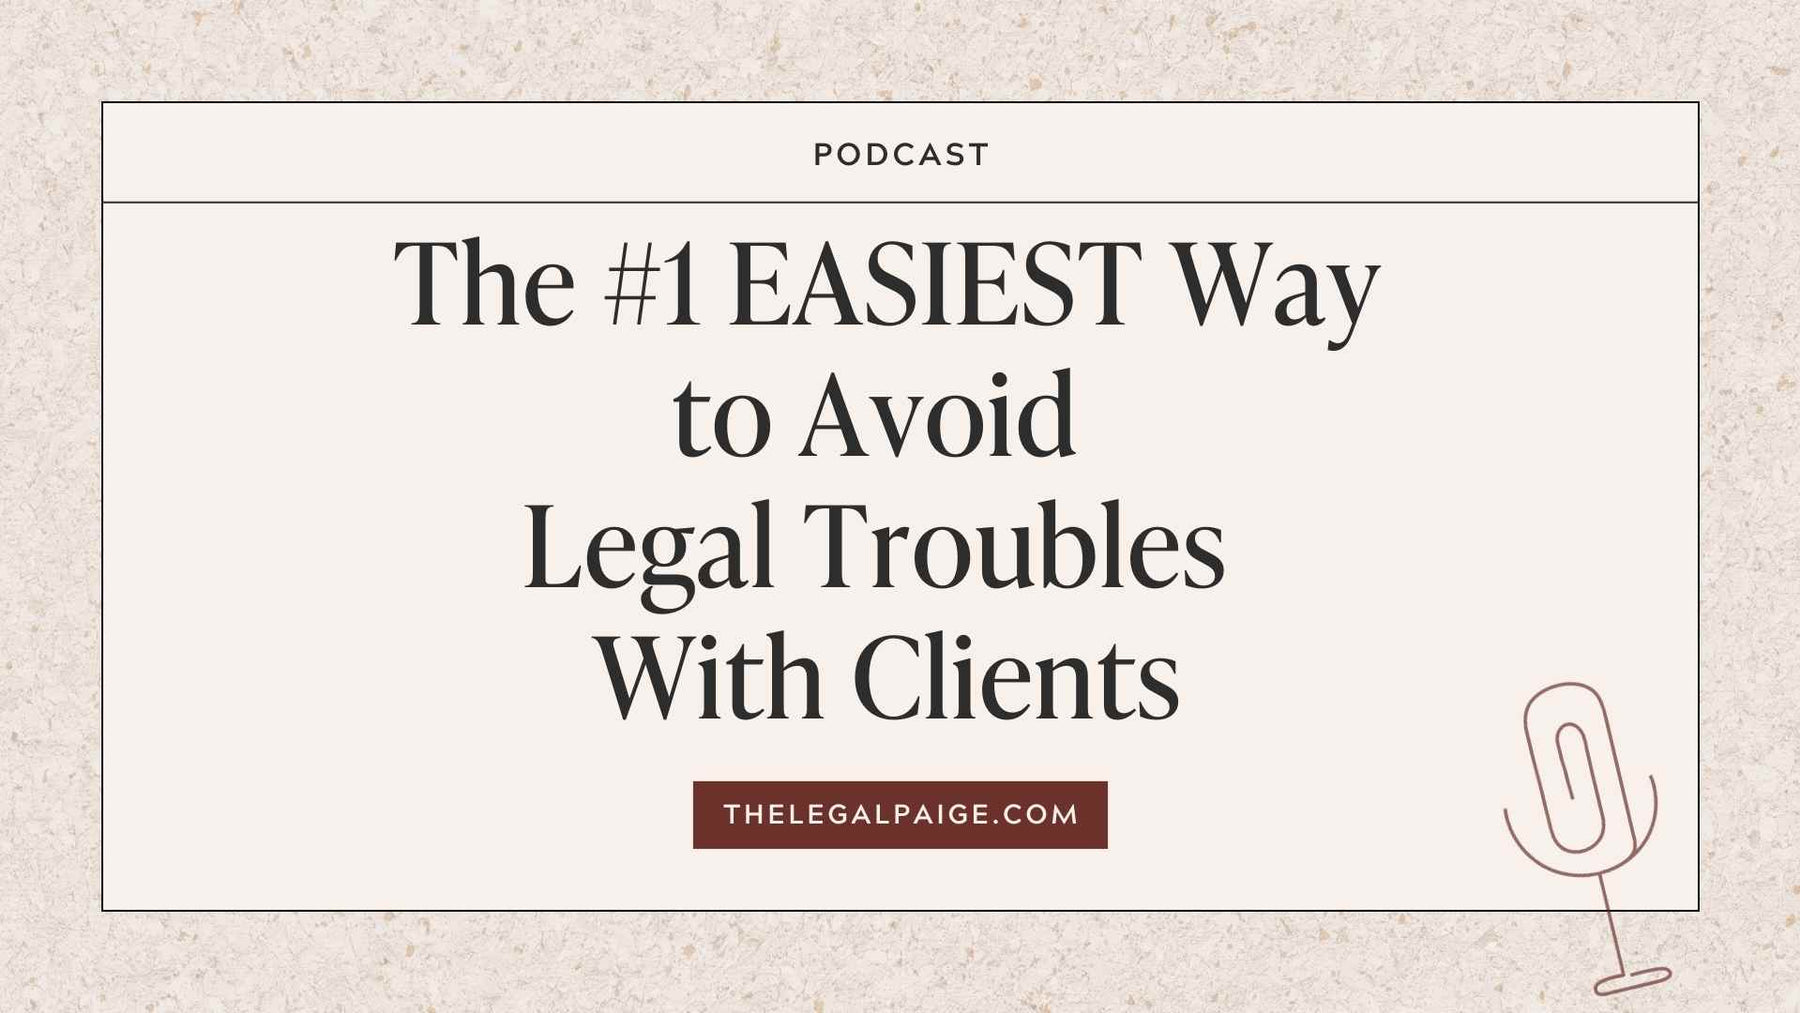 The Legal Paige: The #1 EASIEST Way to Avoid Legal Troubles With Clients